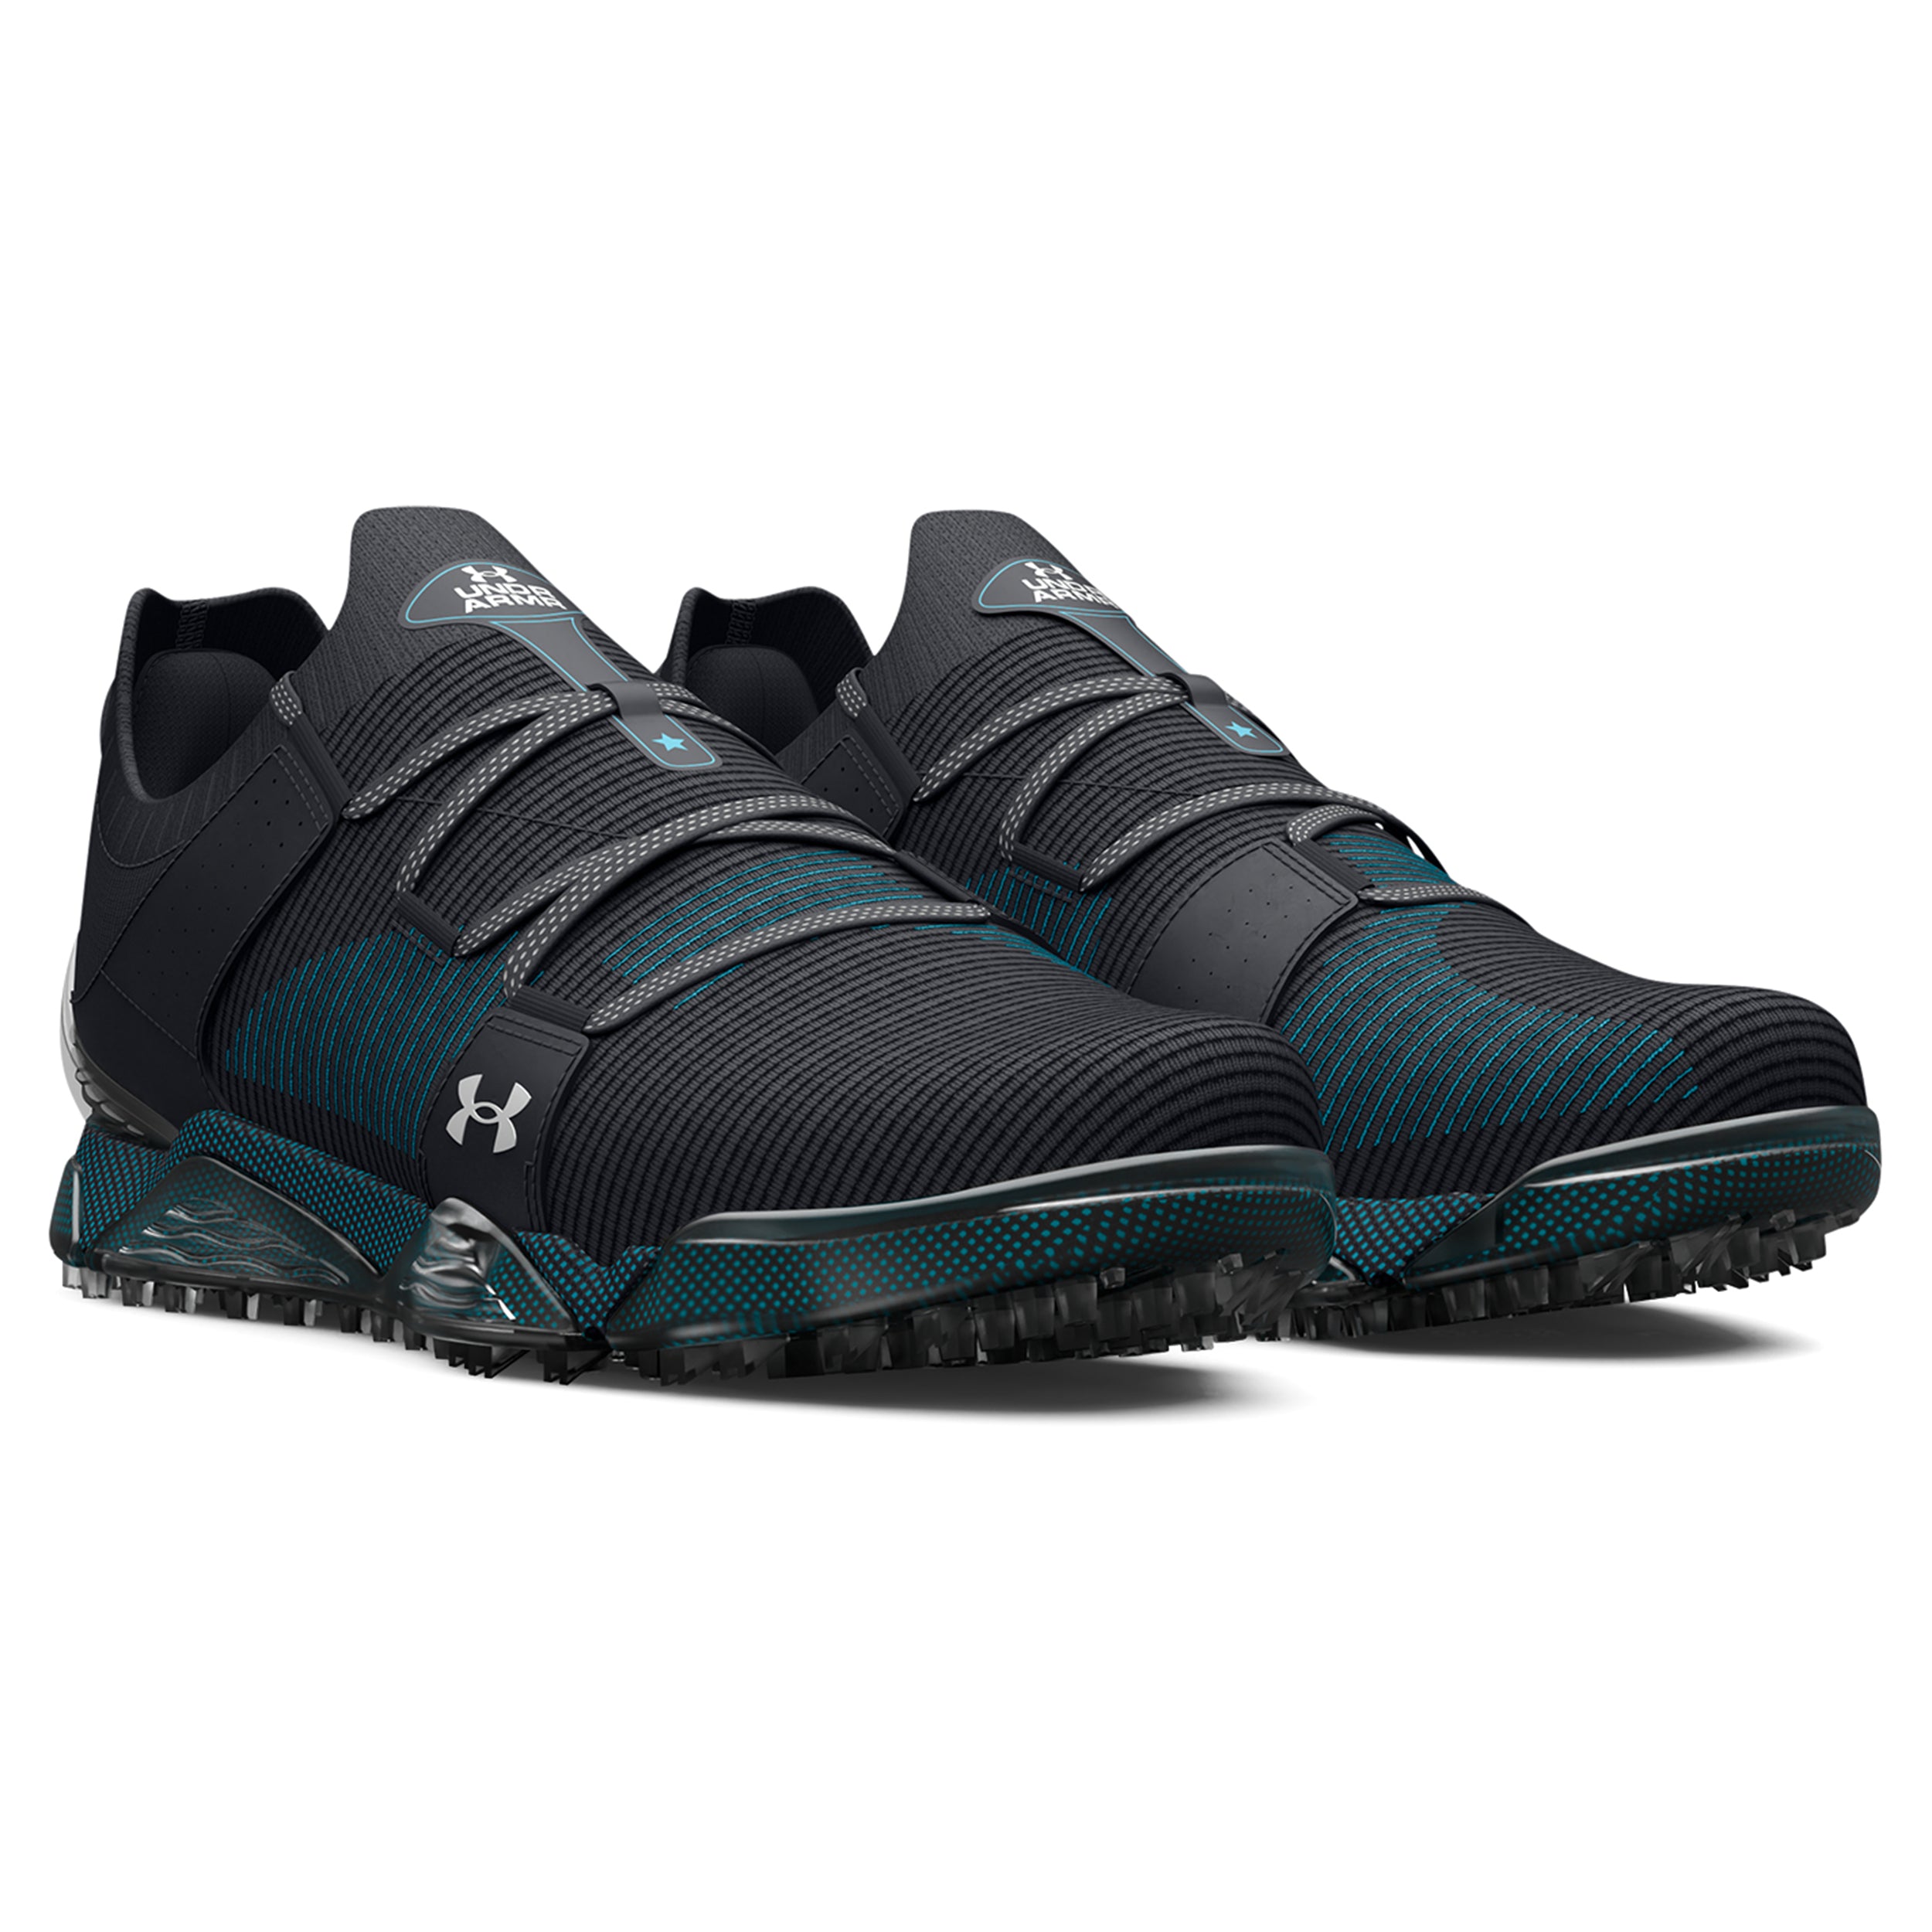 Under Armour HOVR Forge Shoe Review - Golf Monthly Reviews